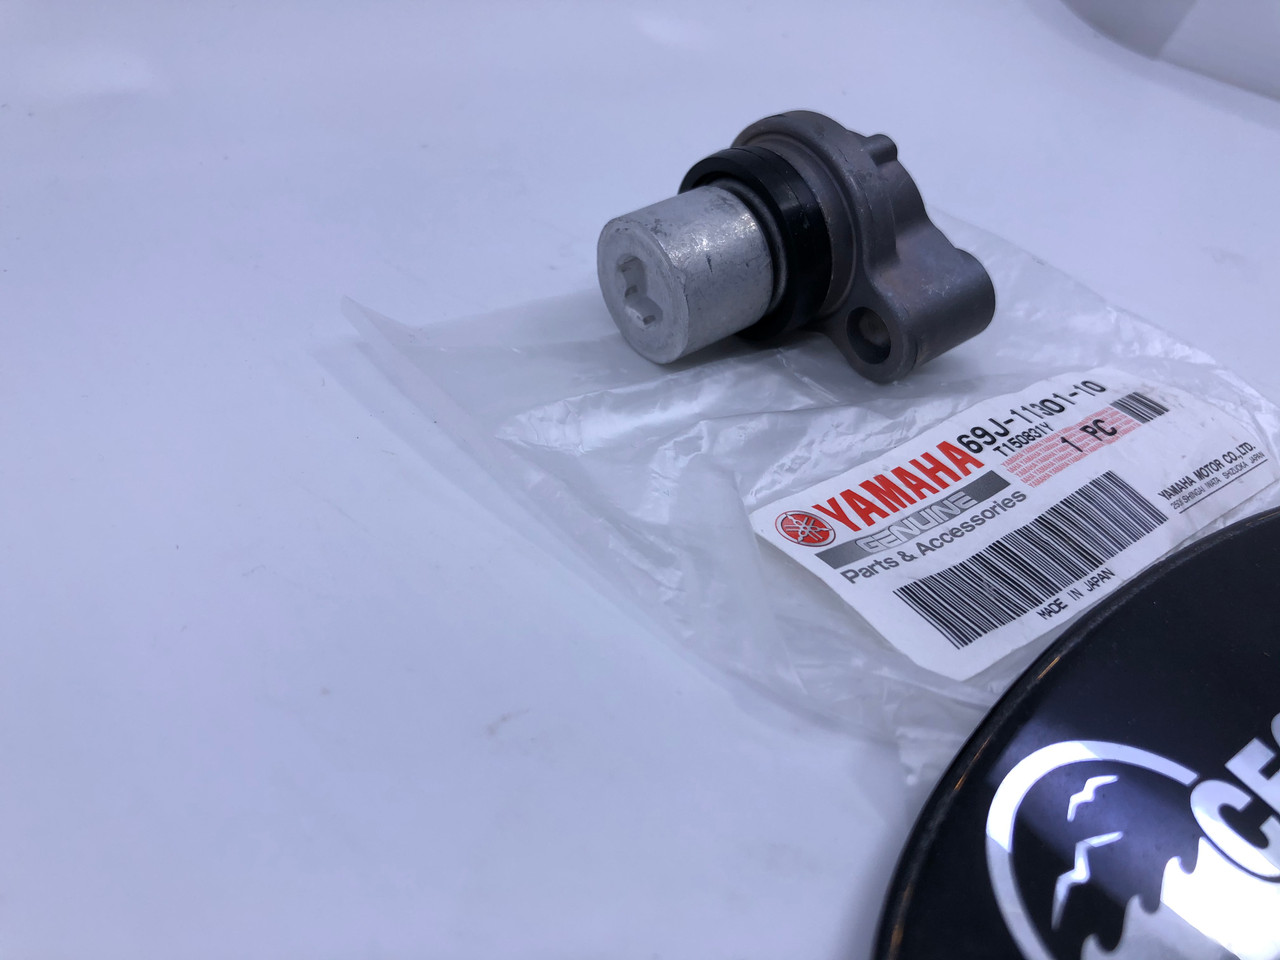 $33.95 GENUINE YAMAHA ANODE COVER ASSY 69J-11301-10-00 *In Stock & Ready To Ship!